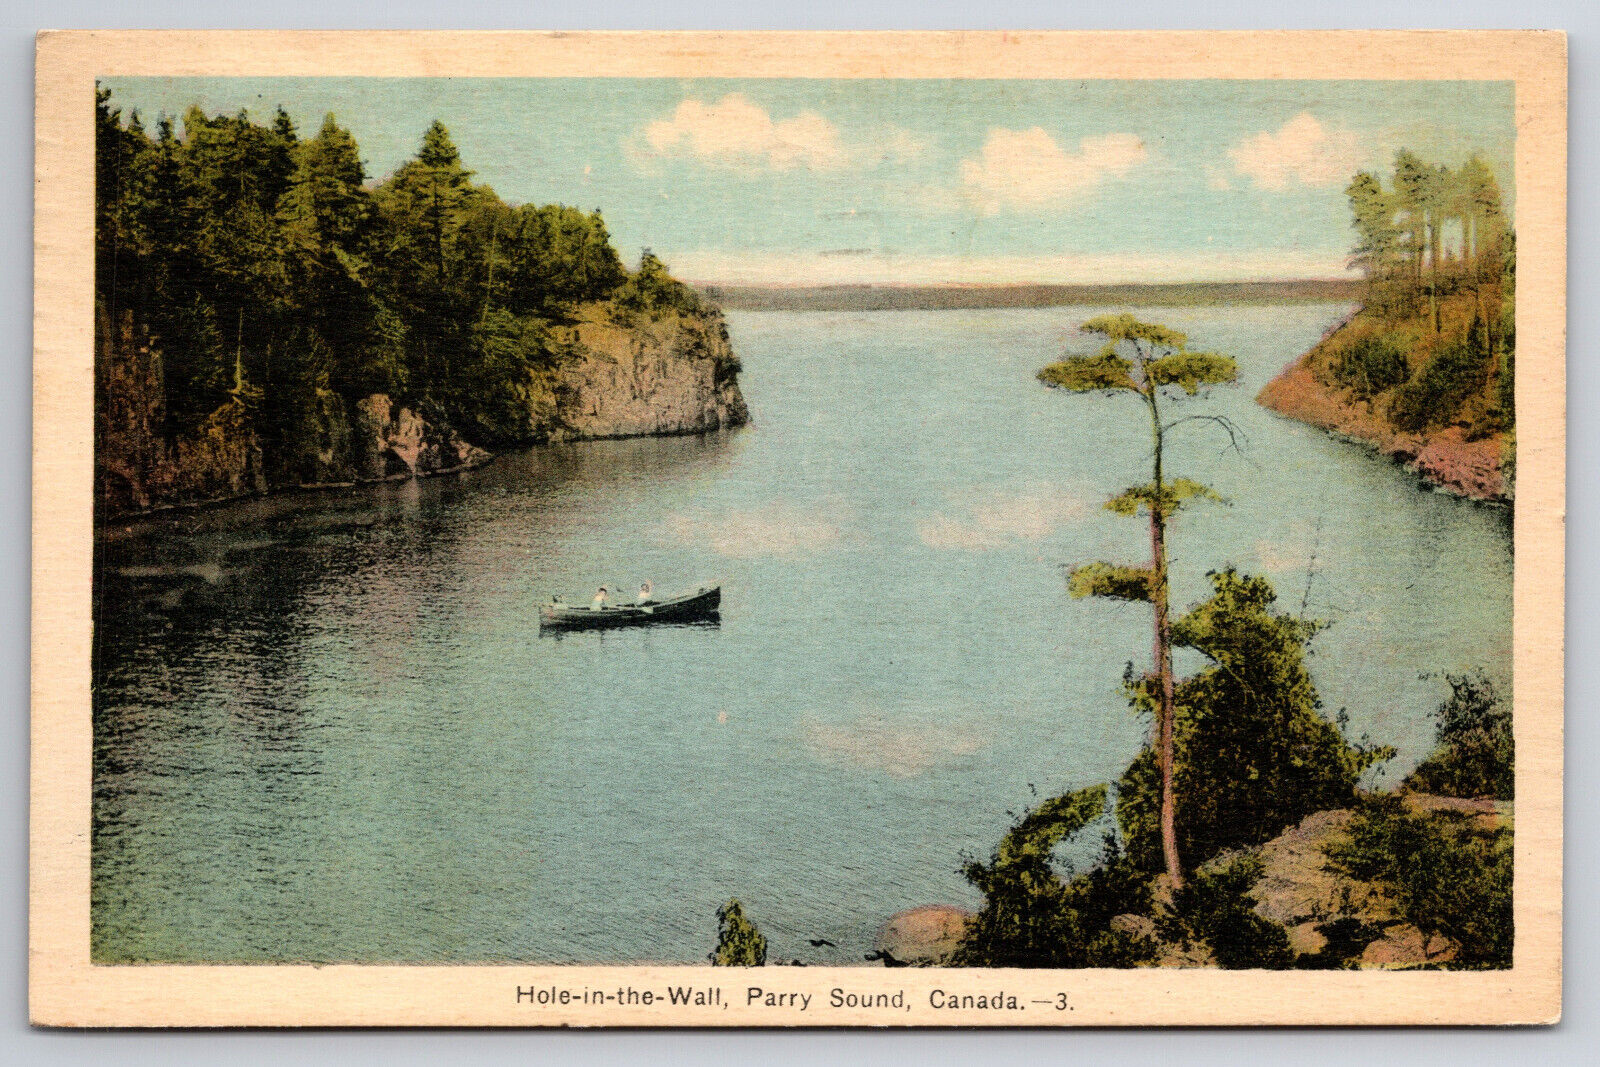 Vintage Canada Postcard Hole In The Wall Parry Sound Posted Jul 24, 1940